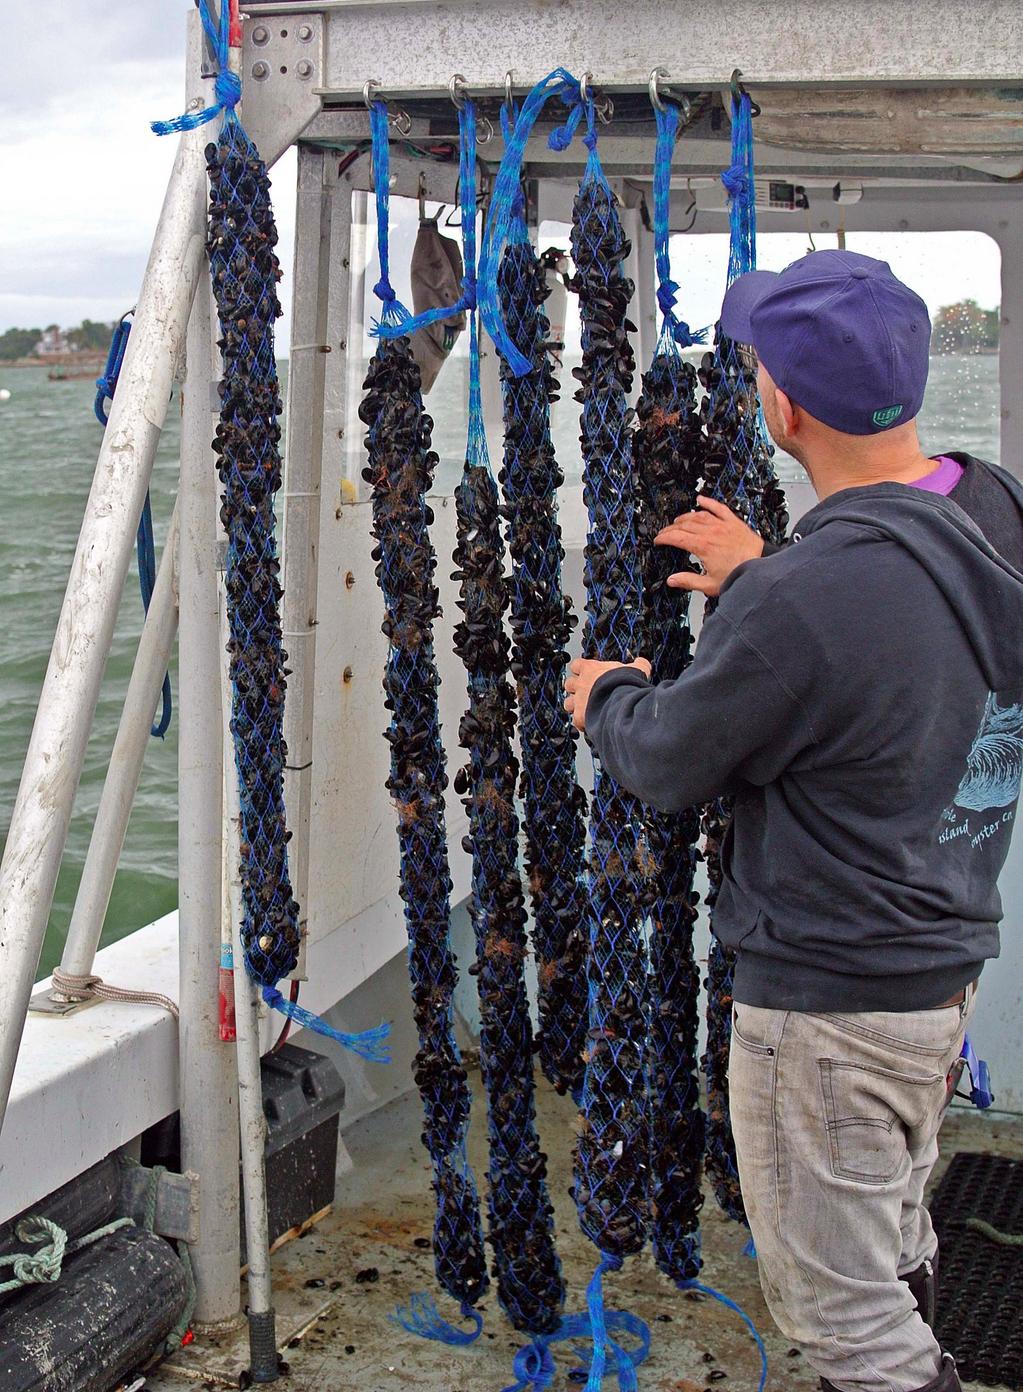 Bren Smith with Mussels from his farm. Photo courtesy of GreenWave